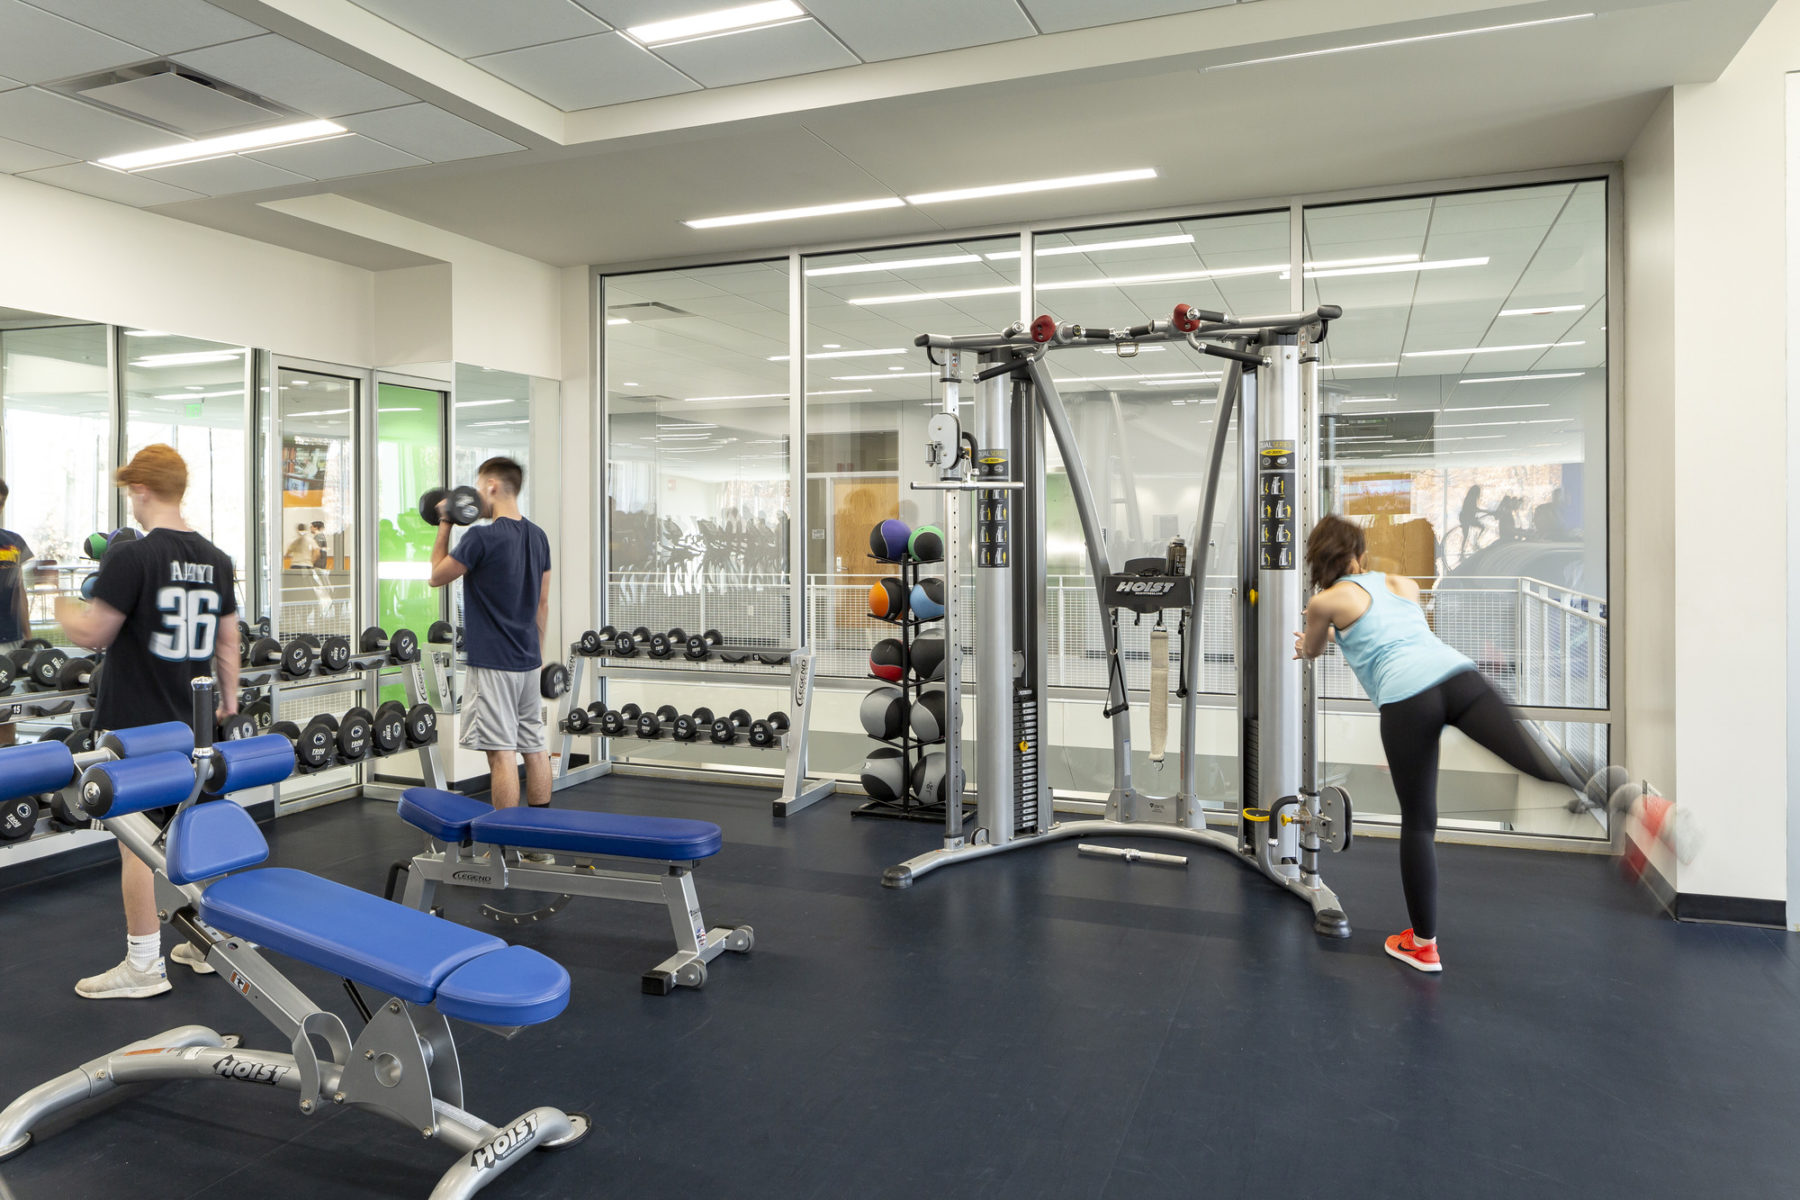 interior weight room photo of people working out